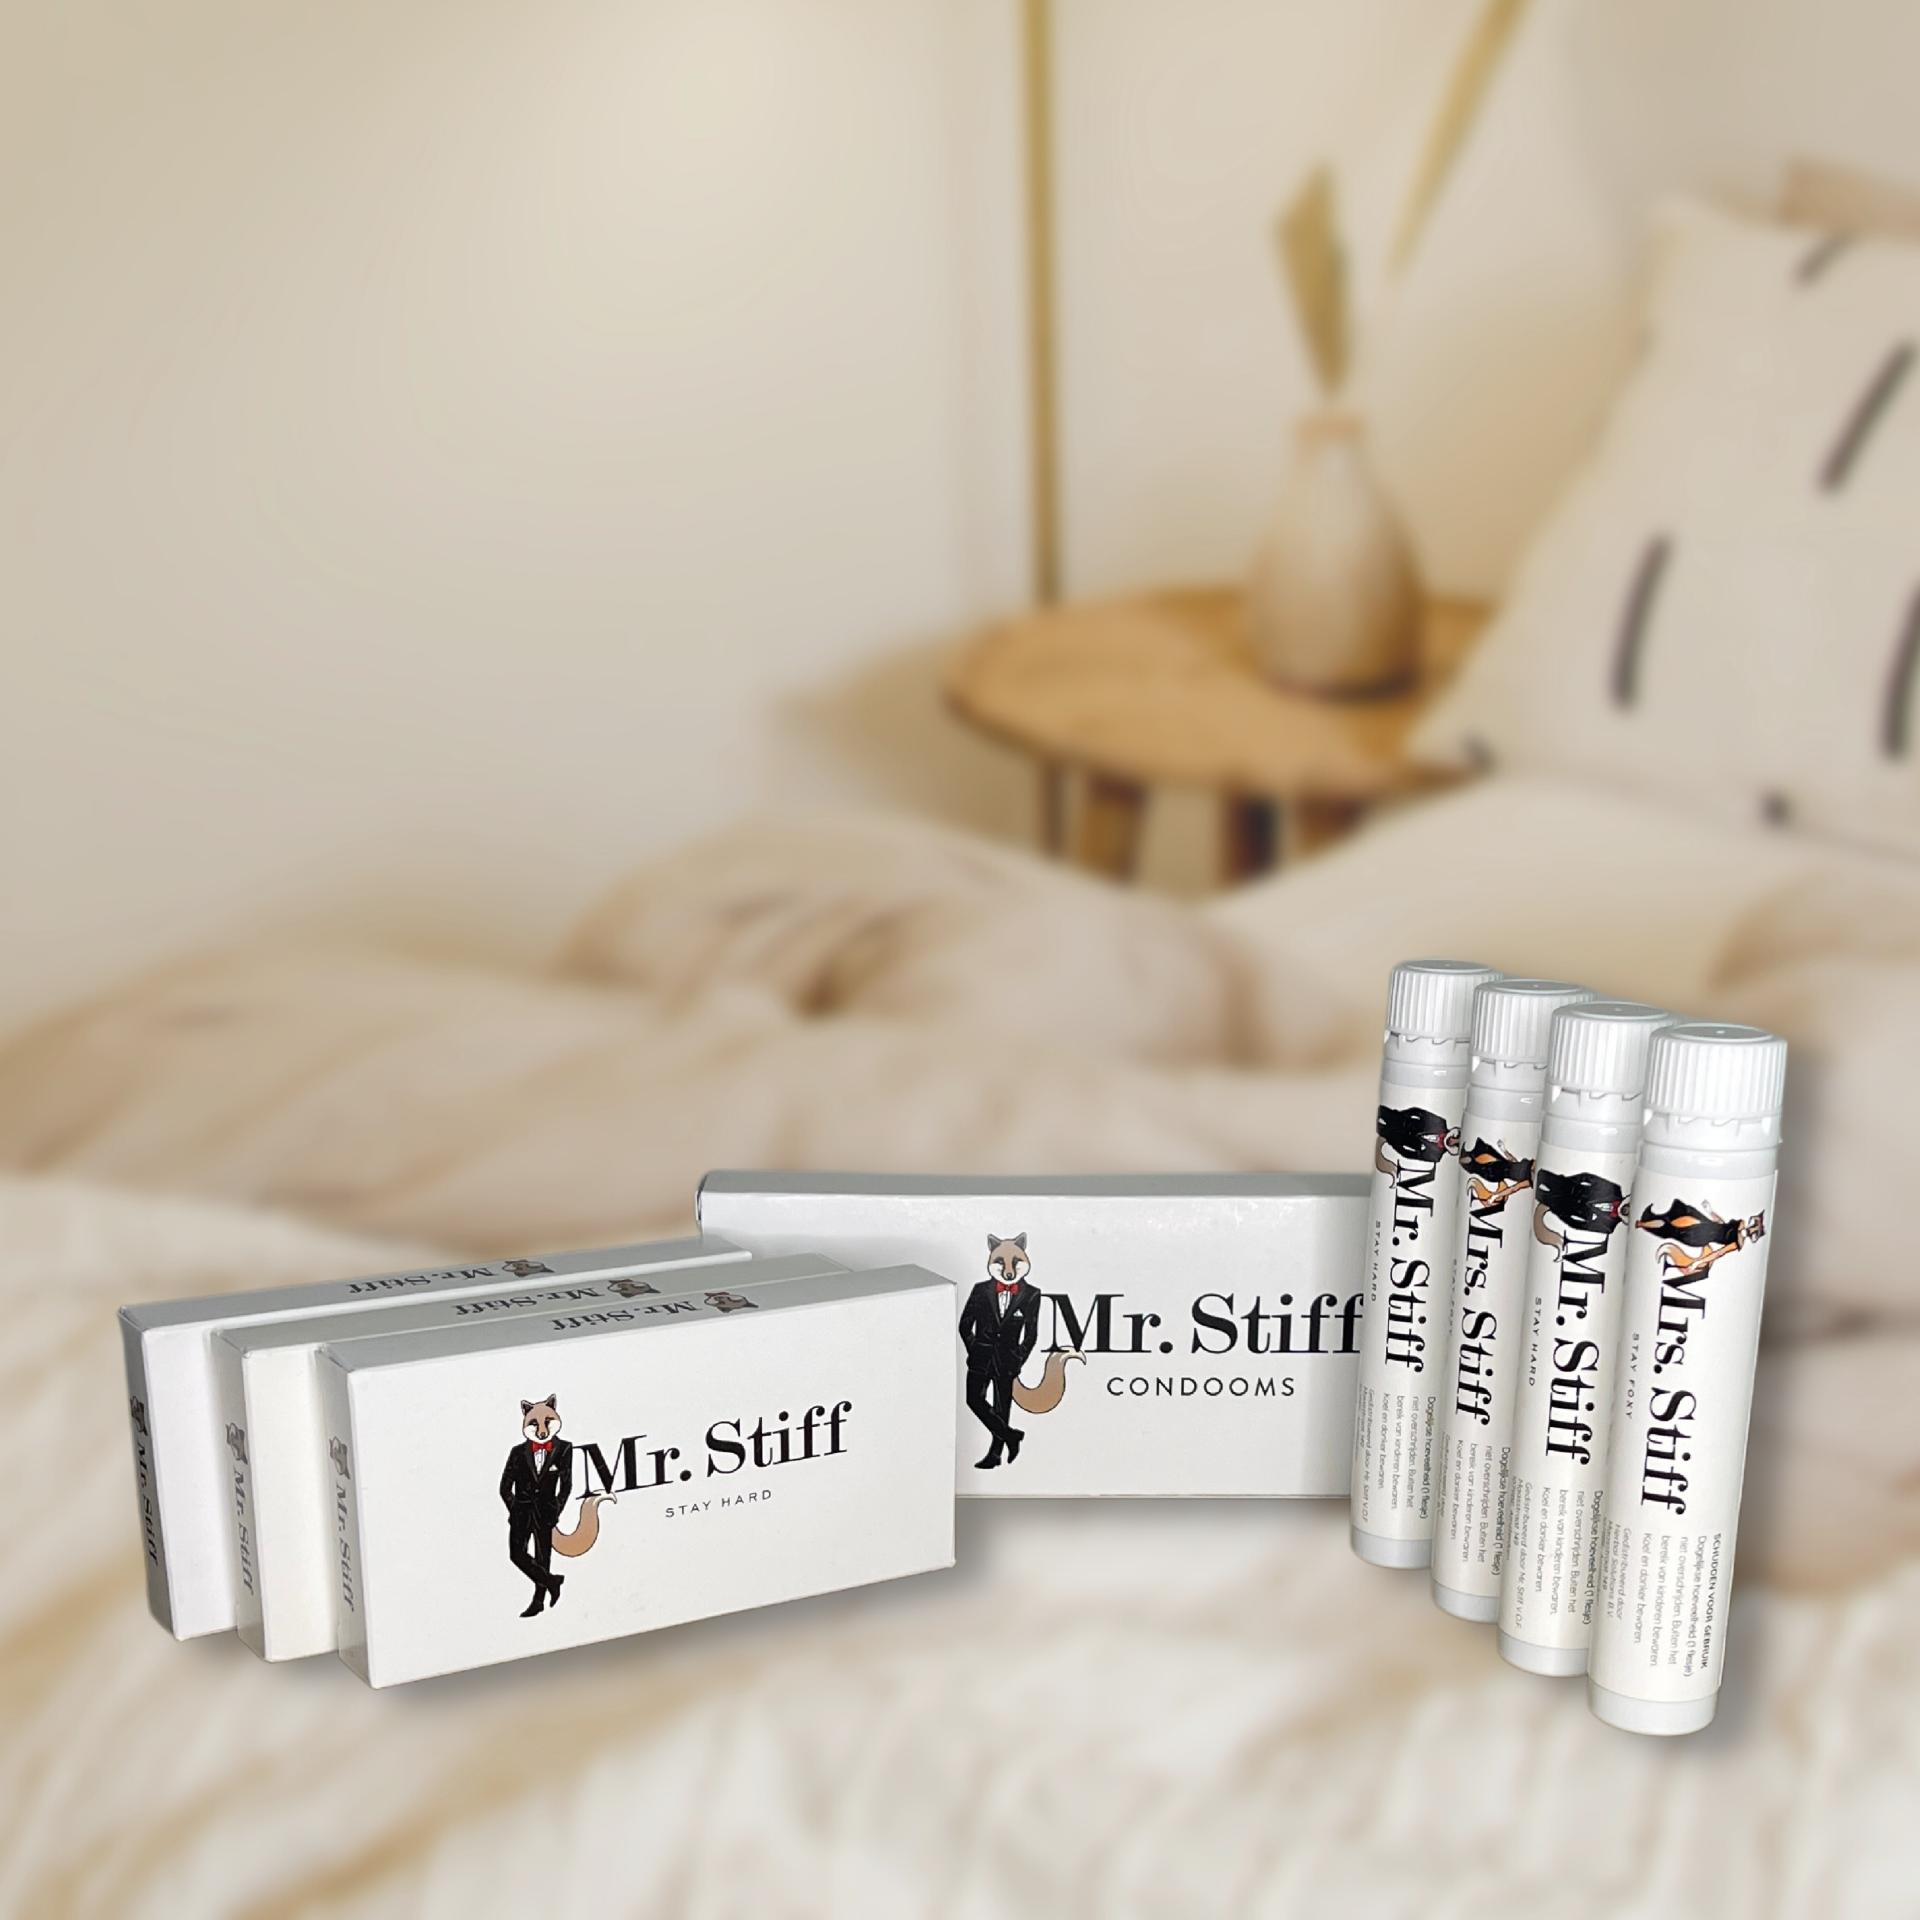 a composite image of Mr Stiff product collection over a blurred bed background